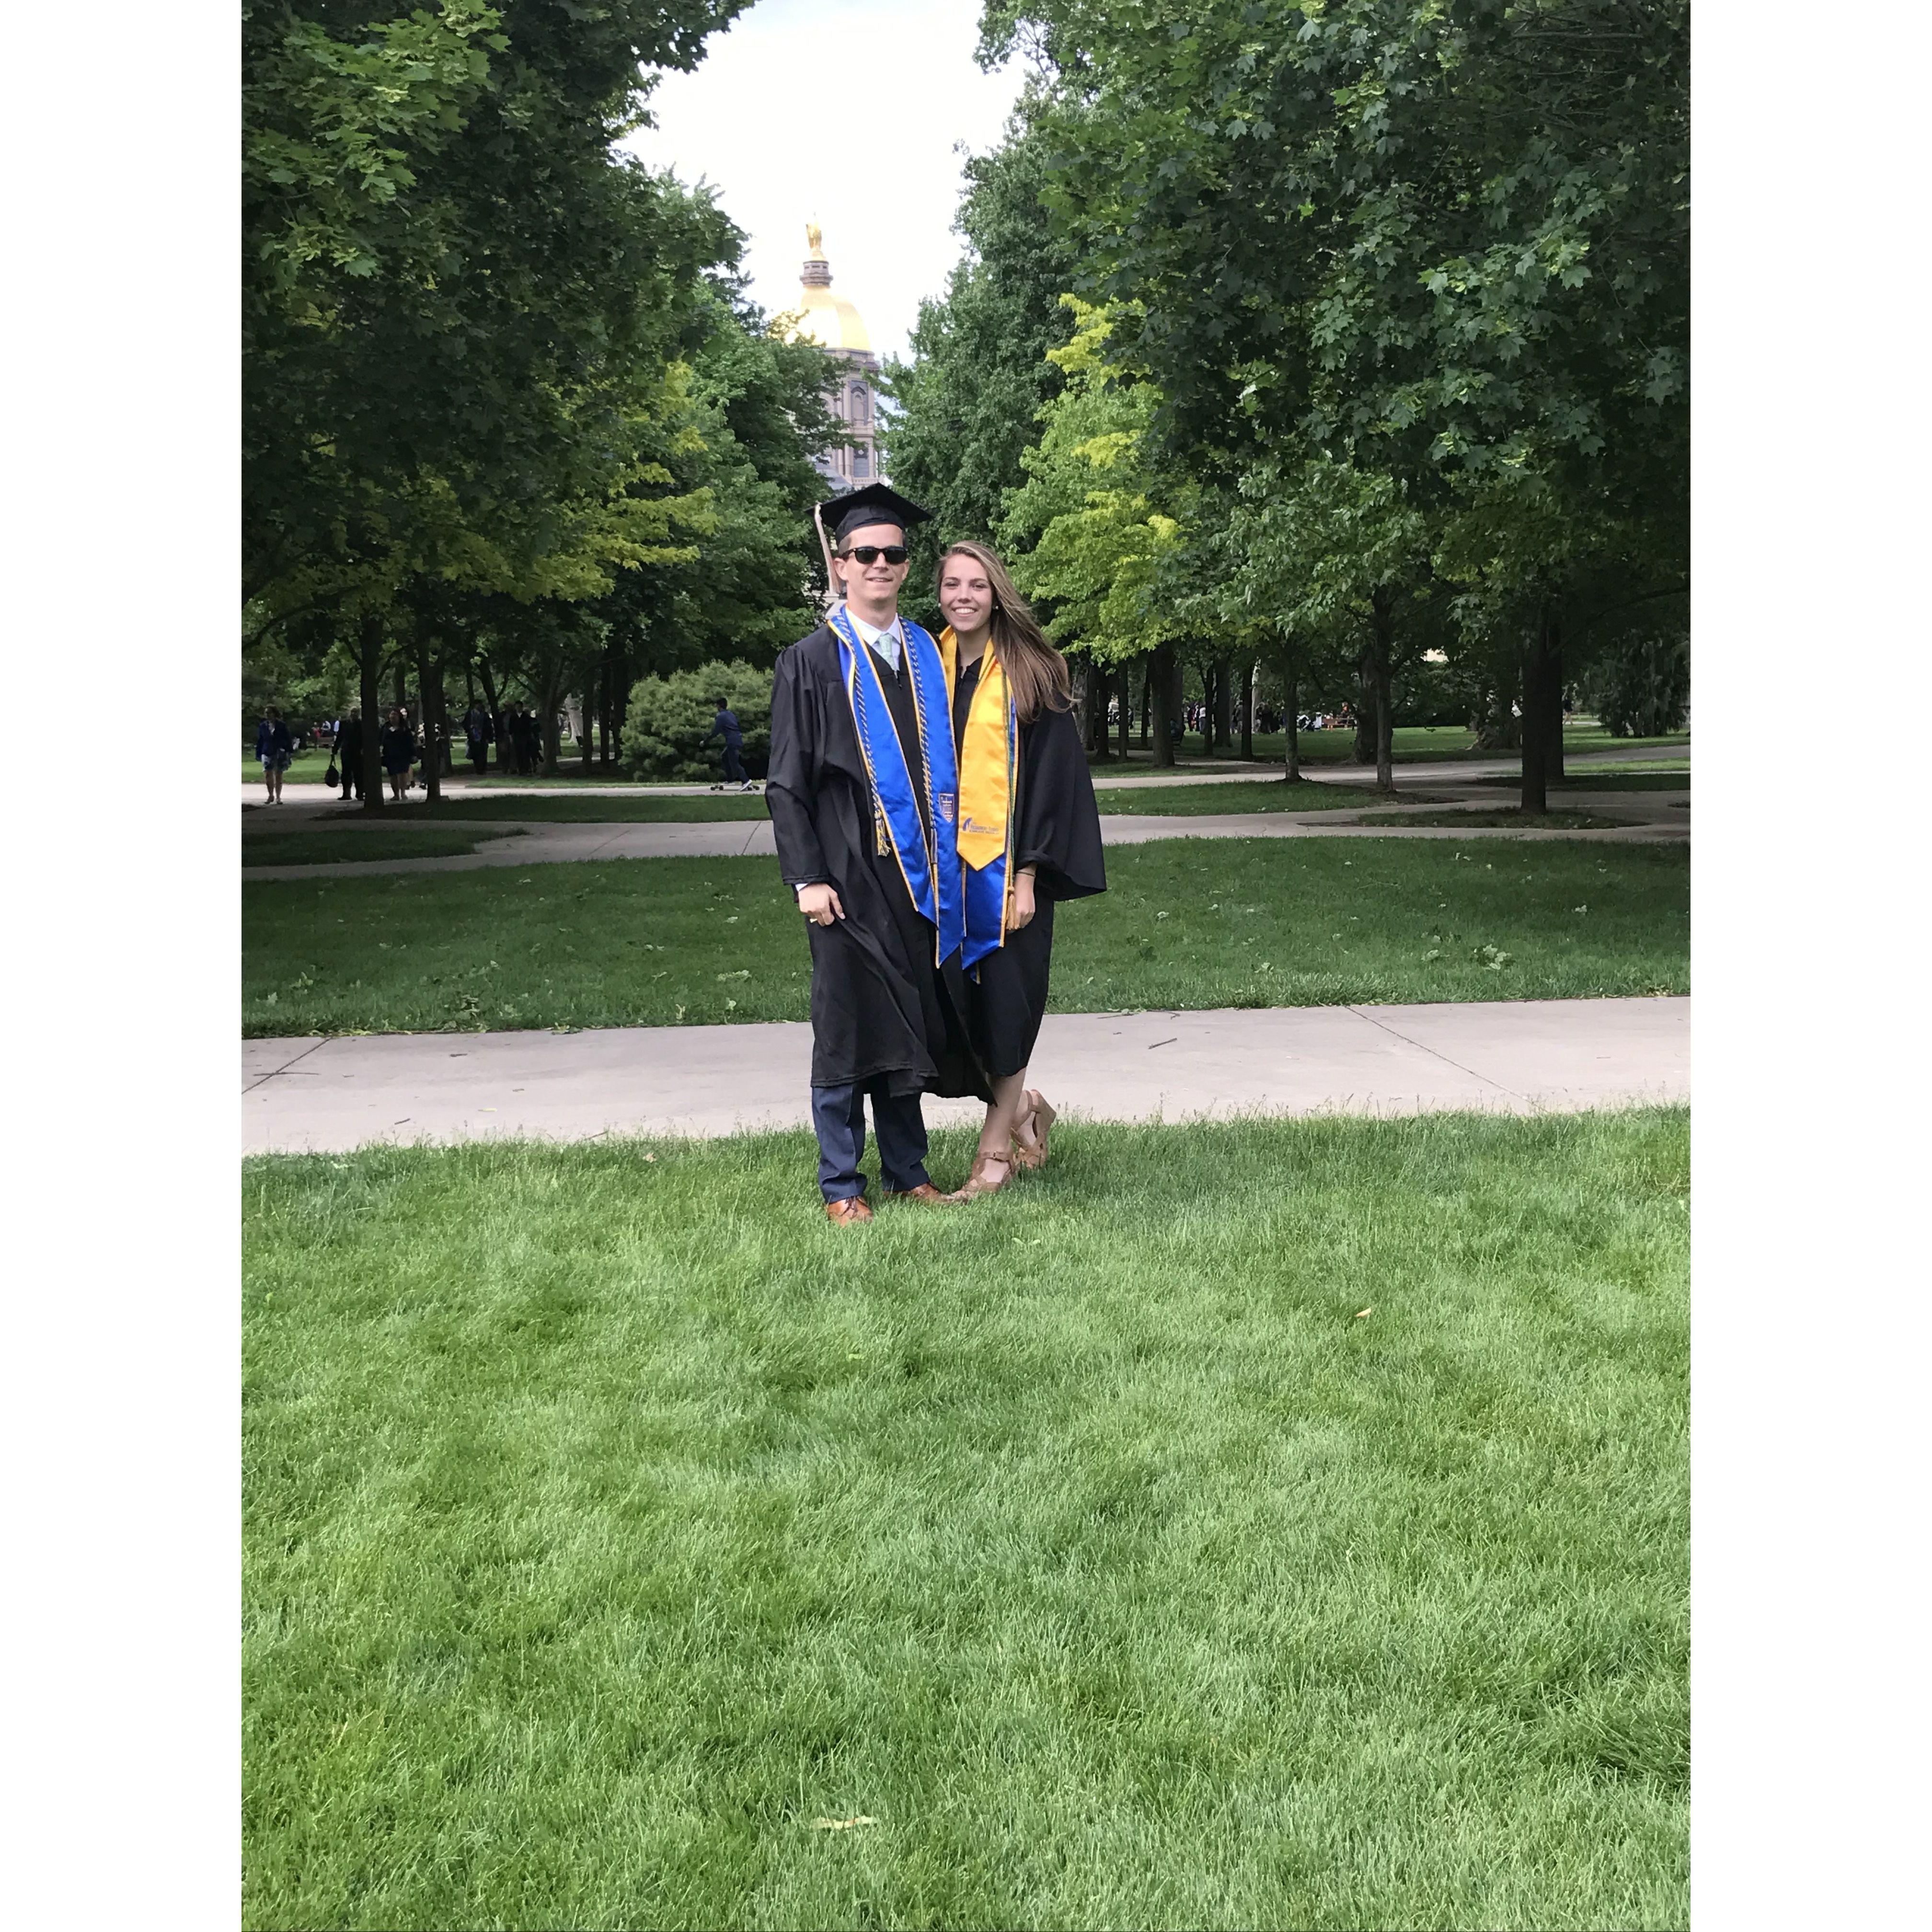 May 2017 - Our graduation weekend at ND!